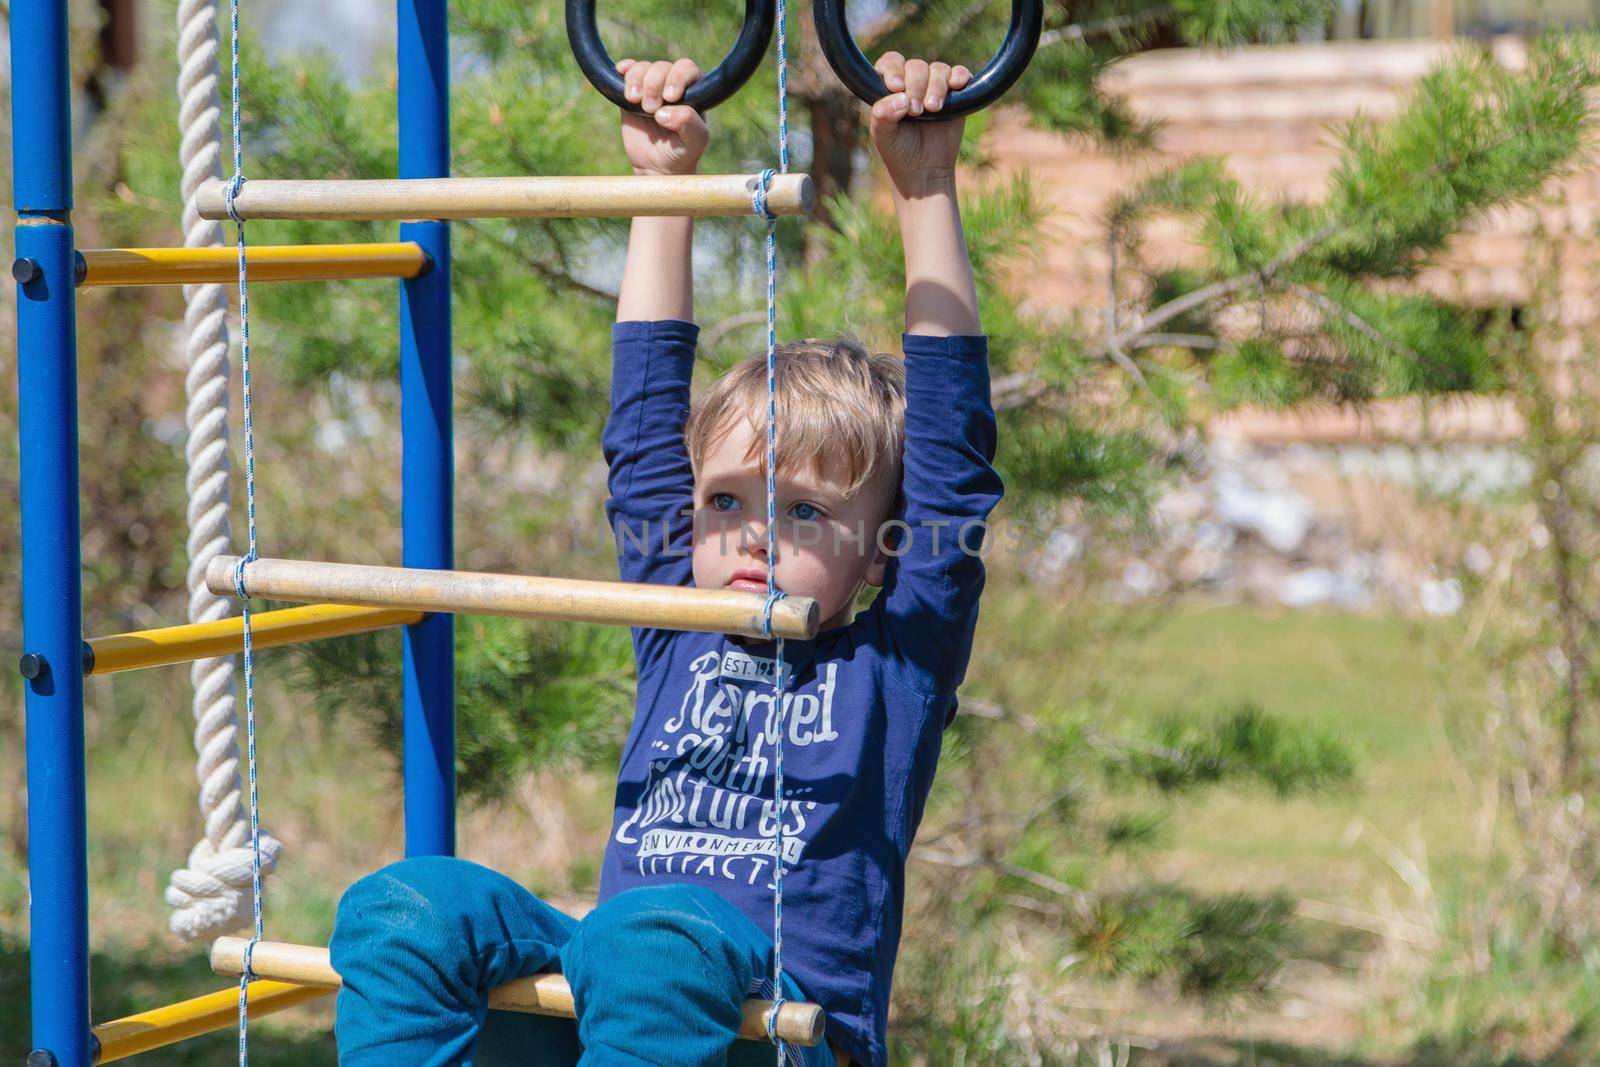 A blonde-haired child is playing on the playground, hanging on rings.